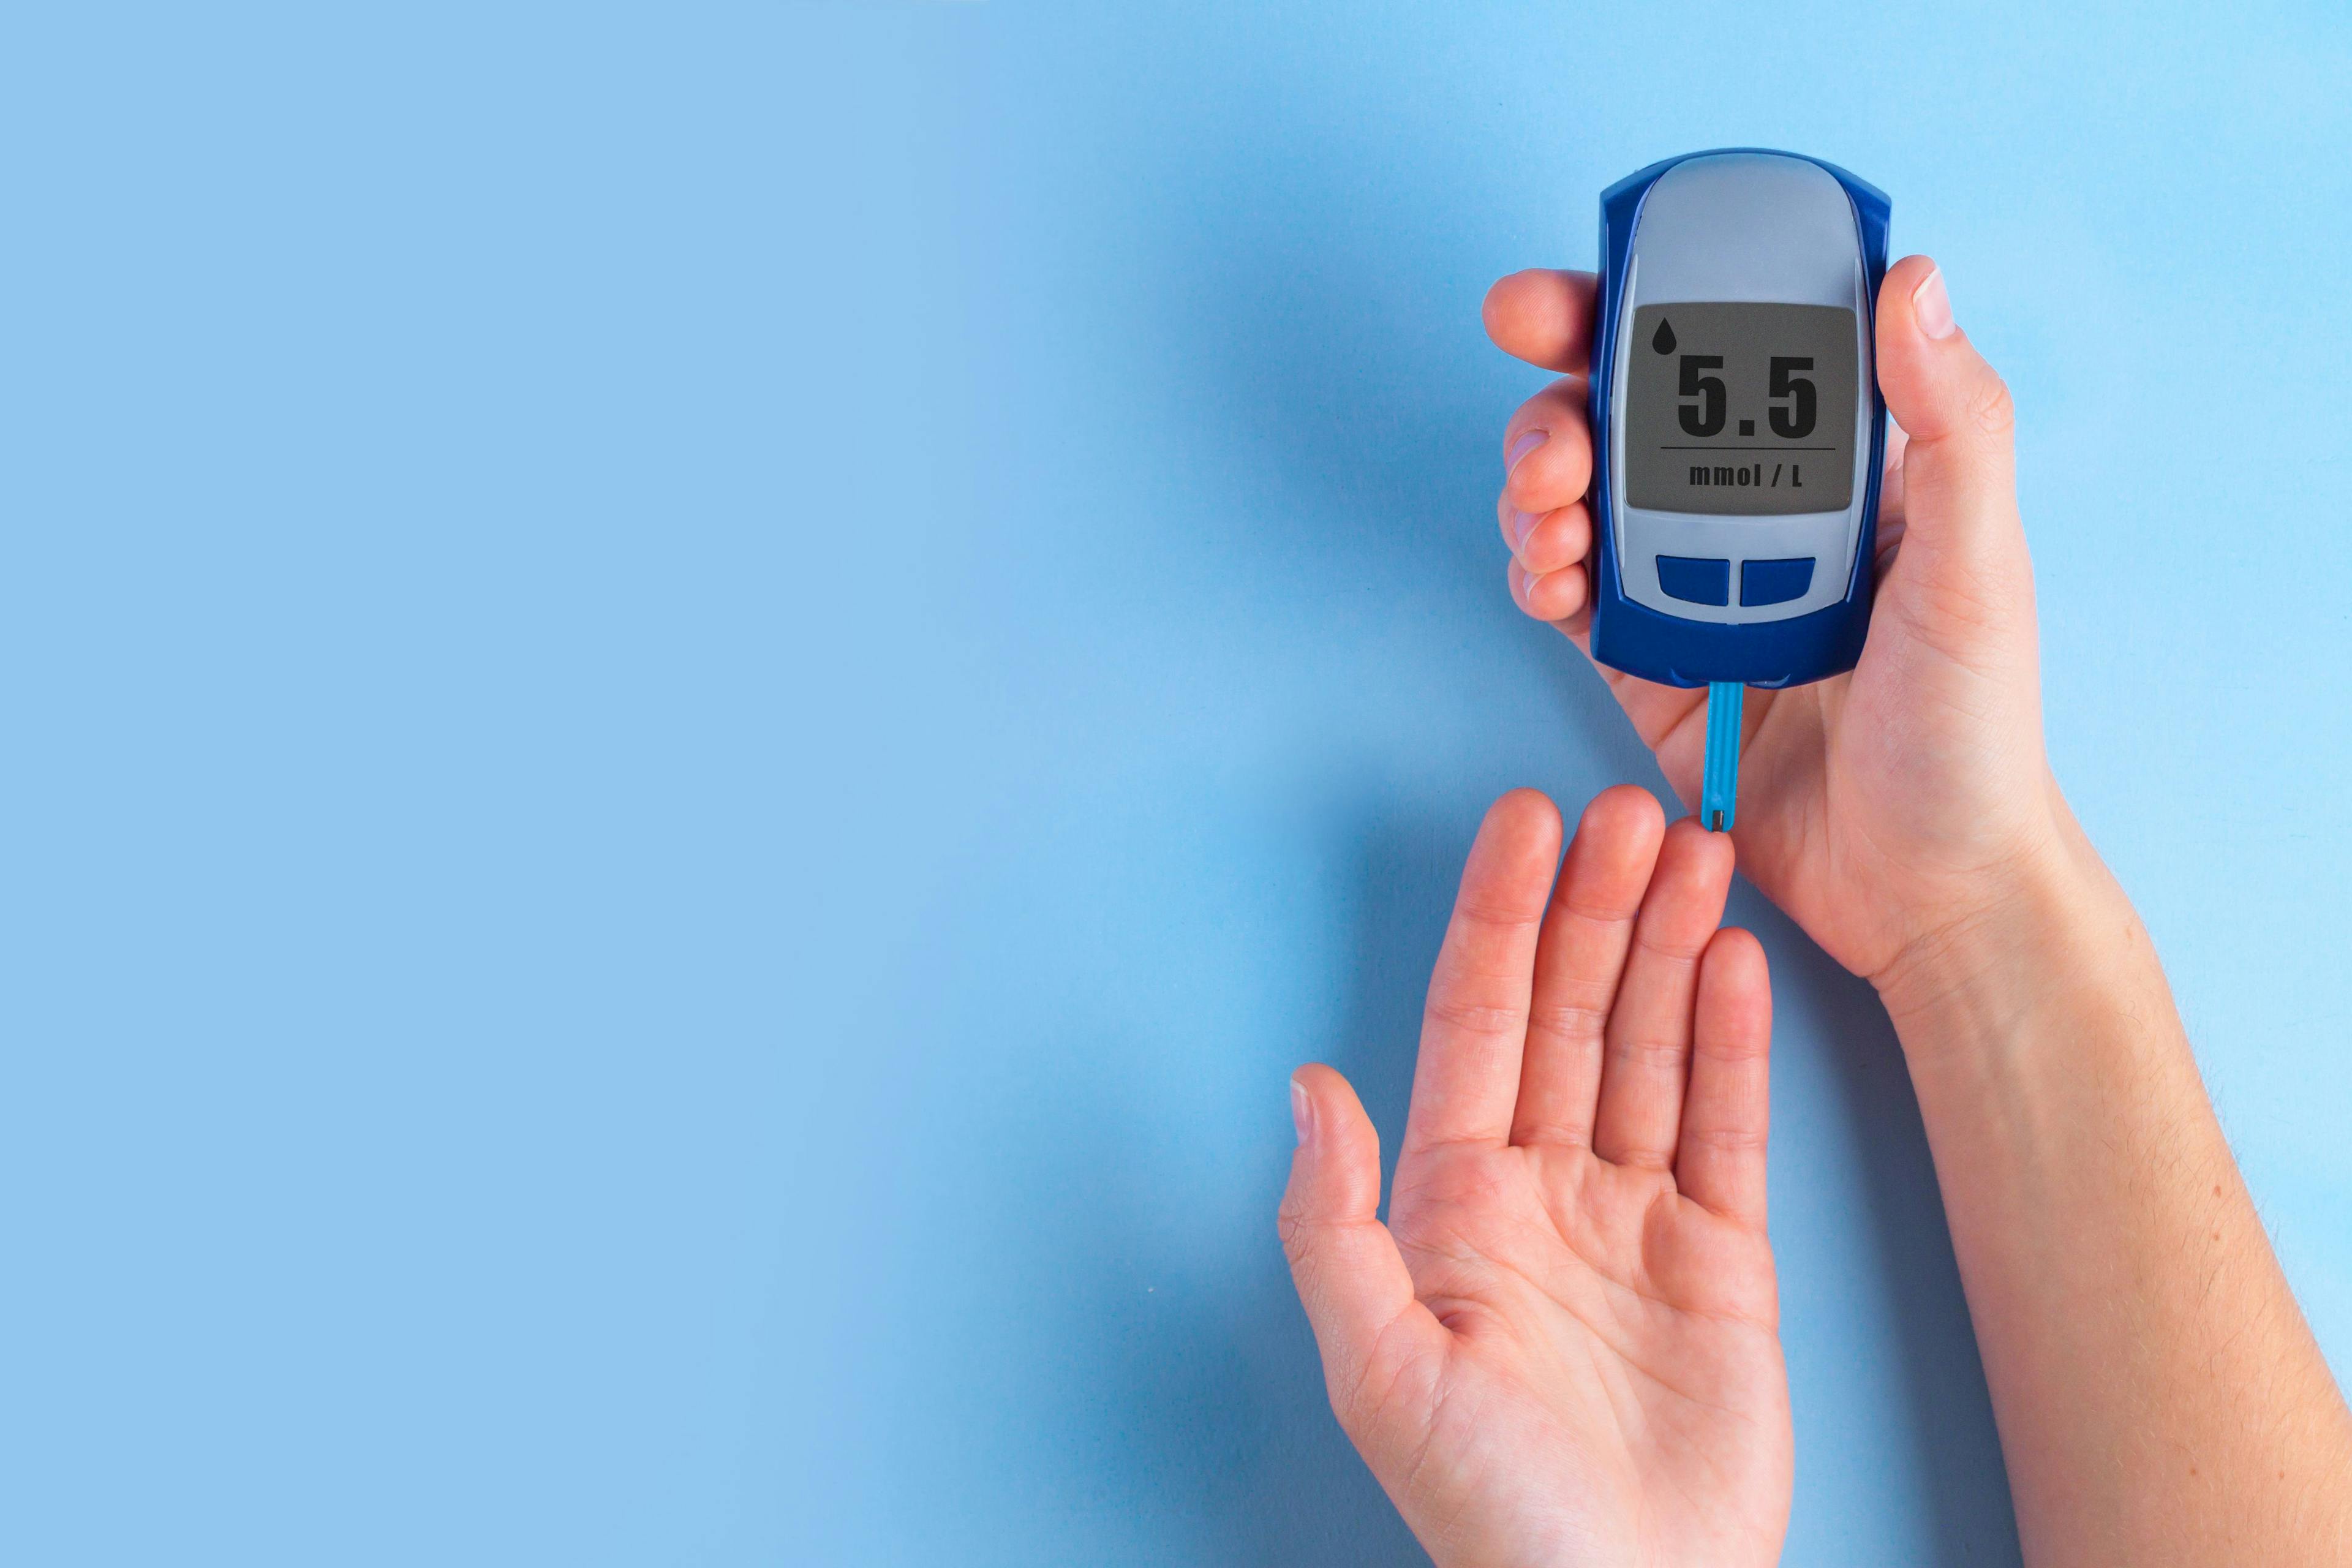 The diabetic measures the level of glucose in the blood. Diabetes concept. Copy space. Diabetes | Image Credit: Goffkein - stock.adobe.com